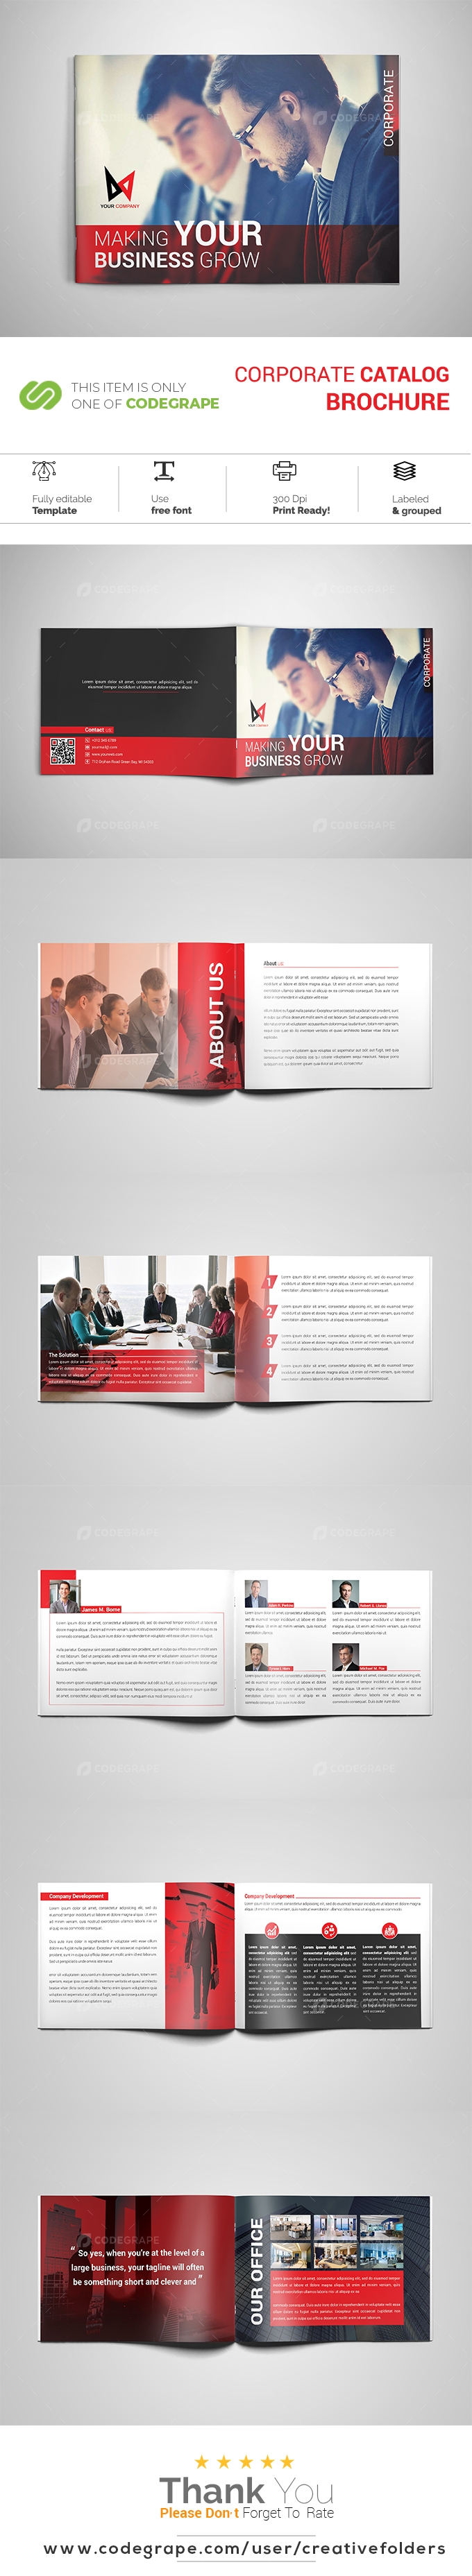 Corporate Catalog Brochure - 12 Pages